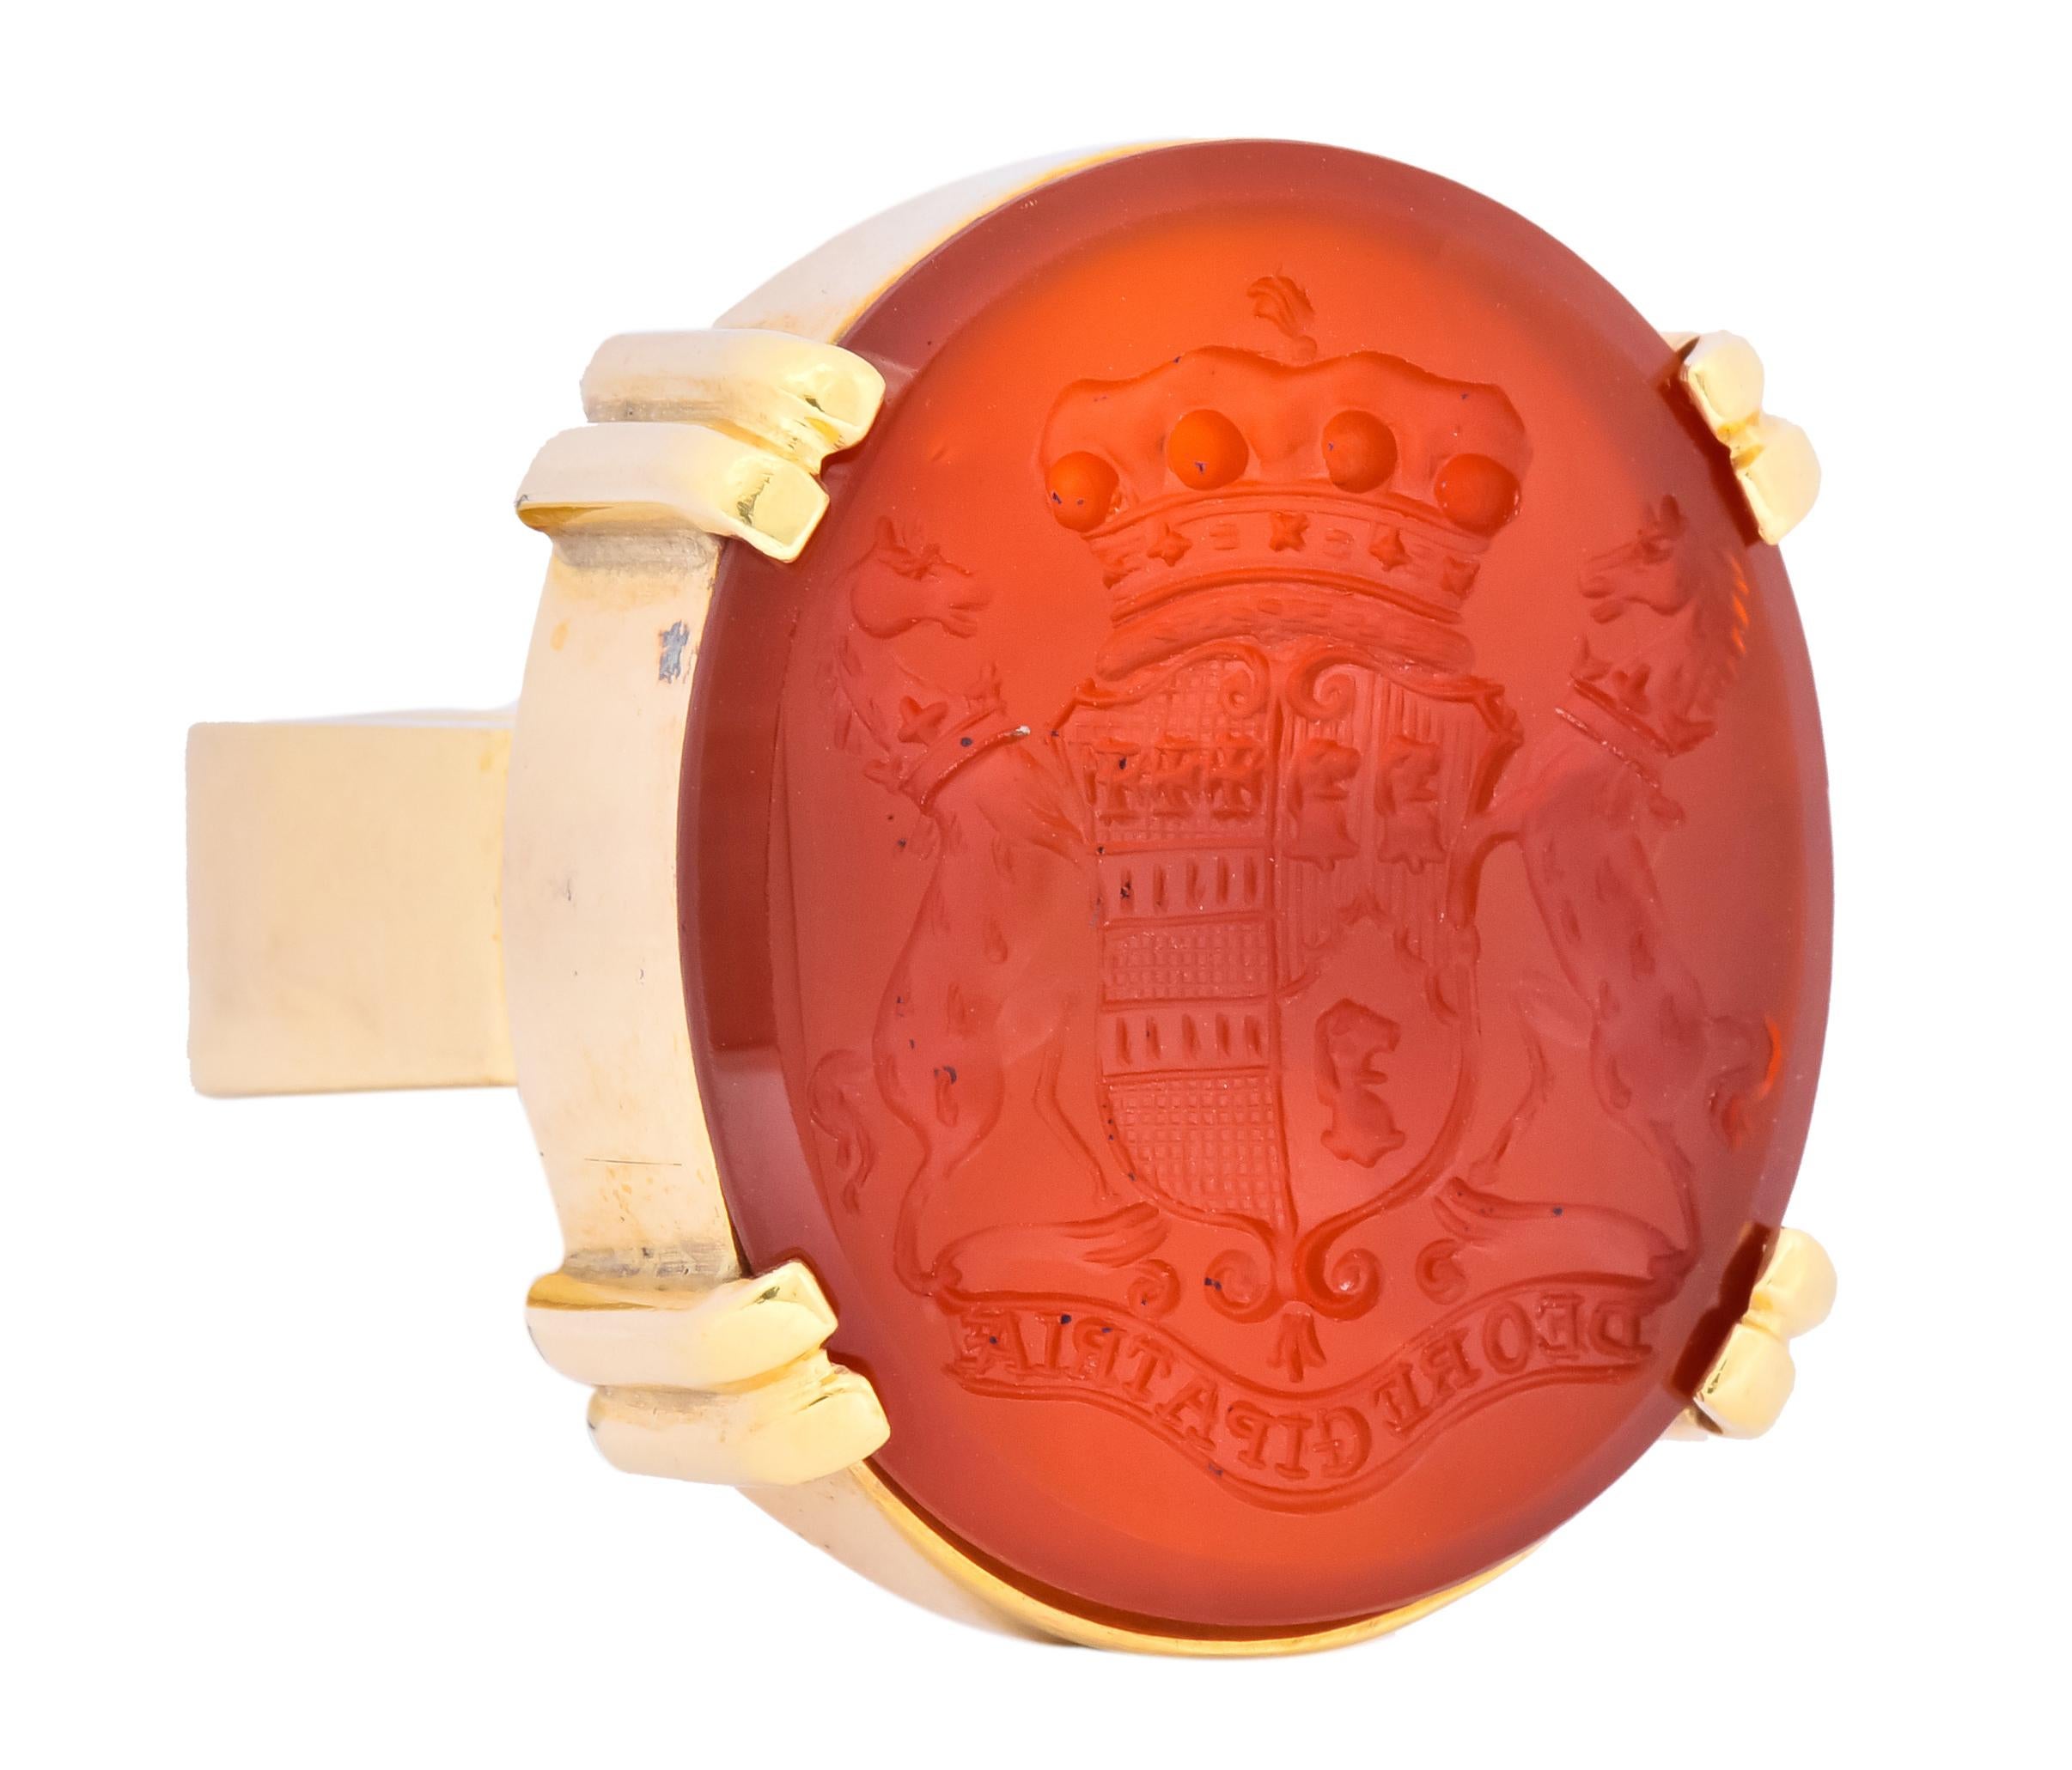 Centering a deep reddish-brown carnelian intaglio, double prong set 

Intaglio depicts a crest flanked by rearing stallions with inscription “Deo Regi Patria”, Latin for “Country is governed by God”

Circa 1950

With maker's mark and stamped 18k for